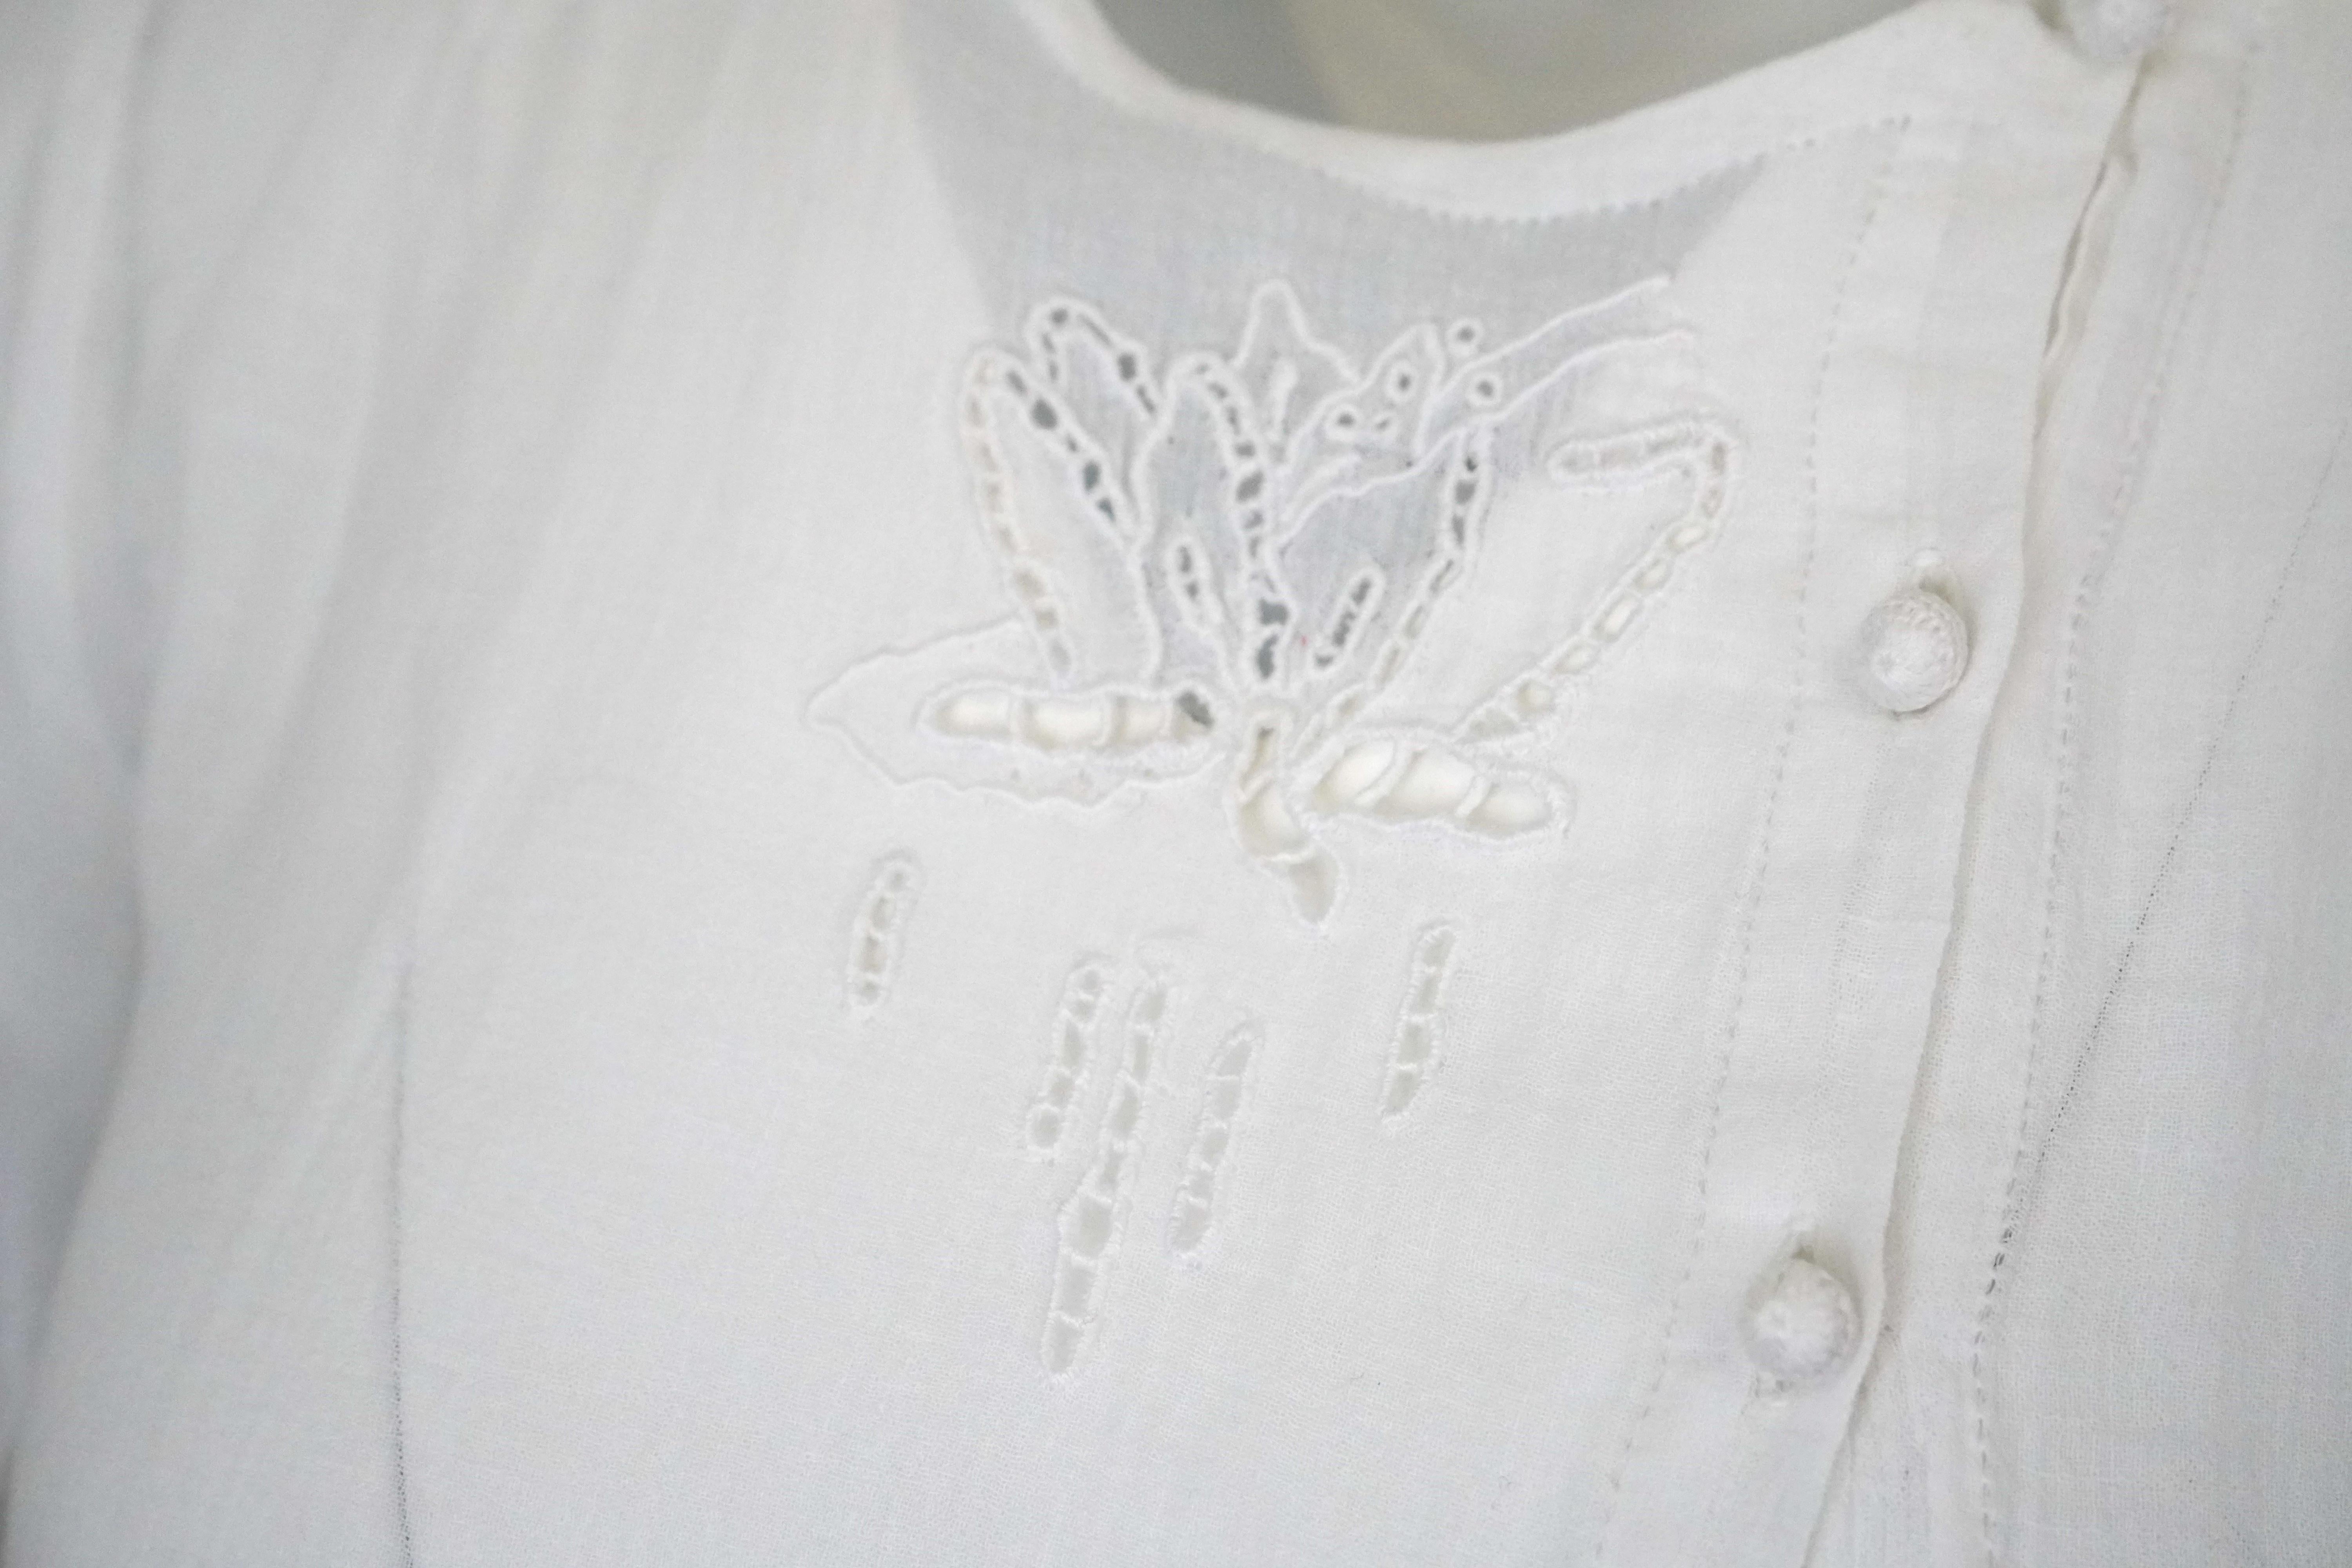 This rare vintage Emmanuelle Khanh white linen blouse is in perfect condition. Featuring a flower motif cutout on the front chest and 6 frog closures down the left front of the blouse. It also has a collar and displays excellent craftsmanship. 

She